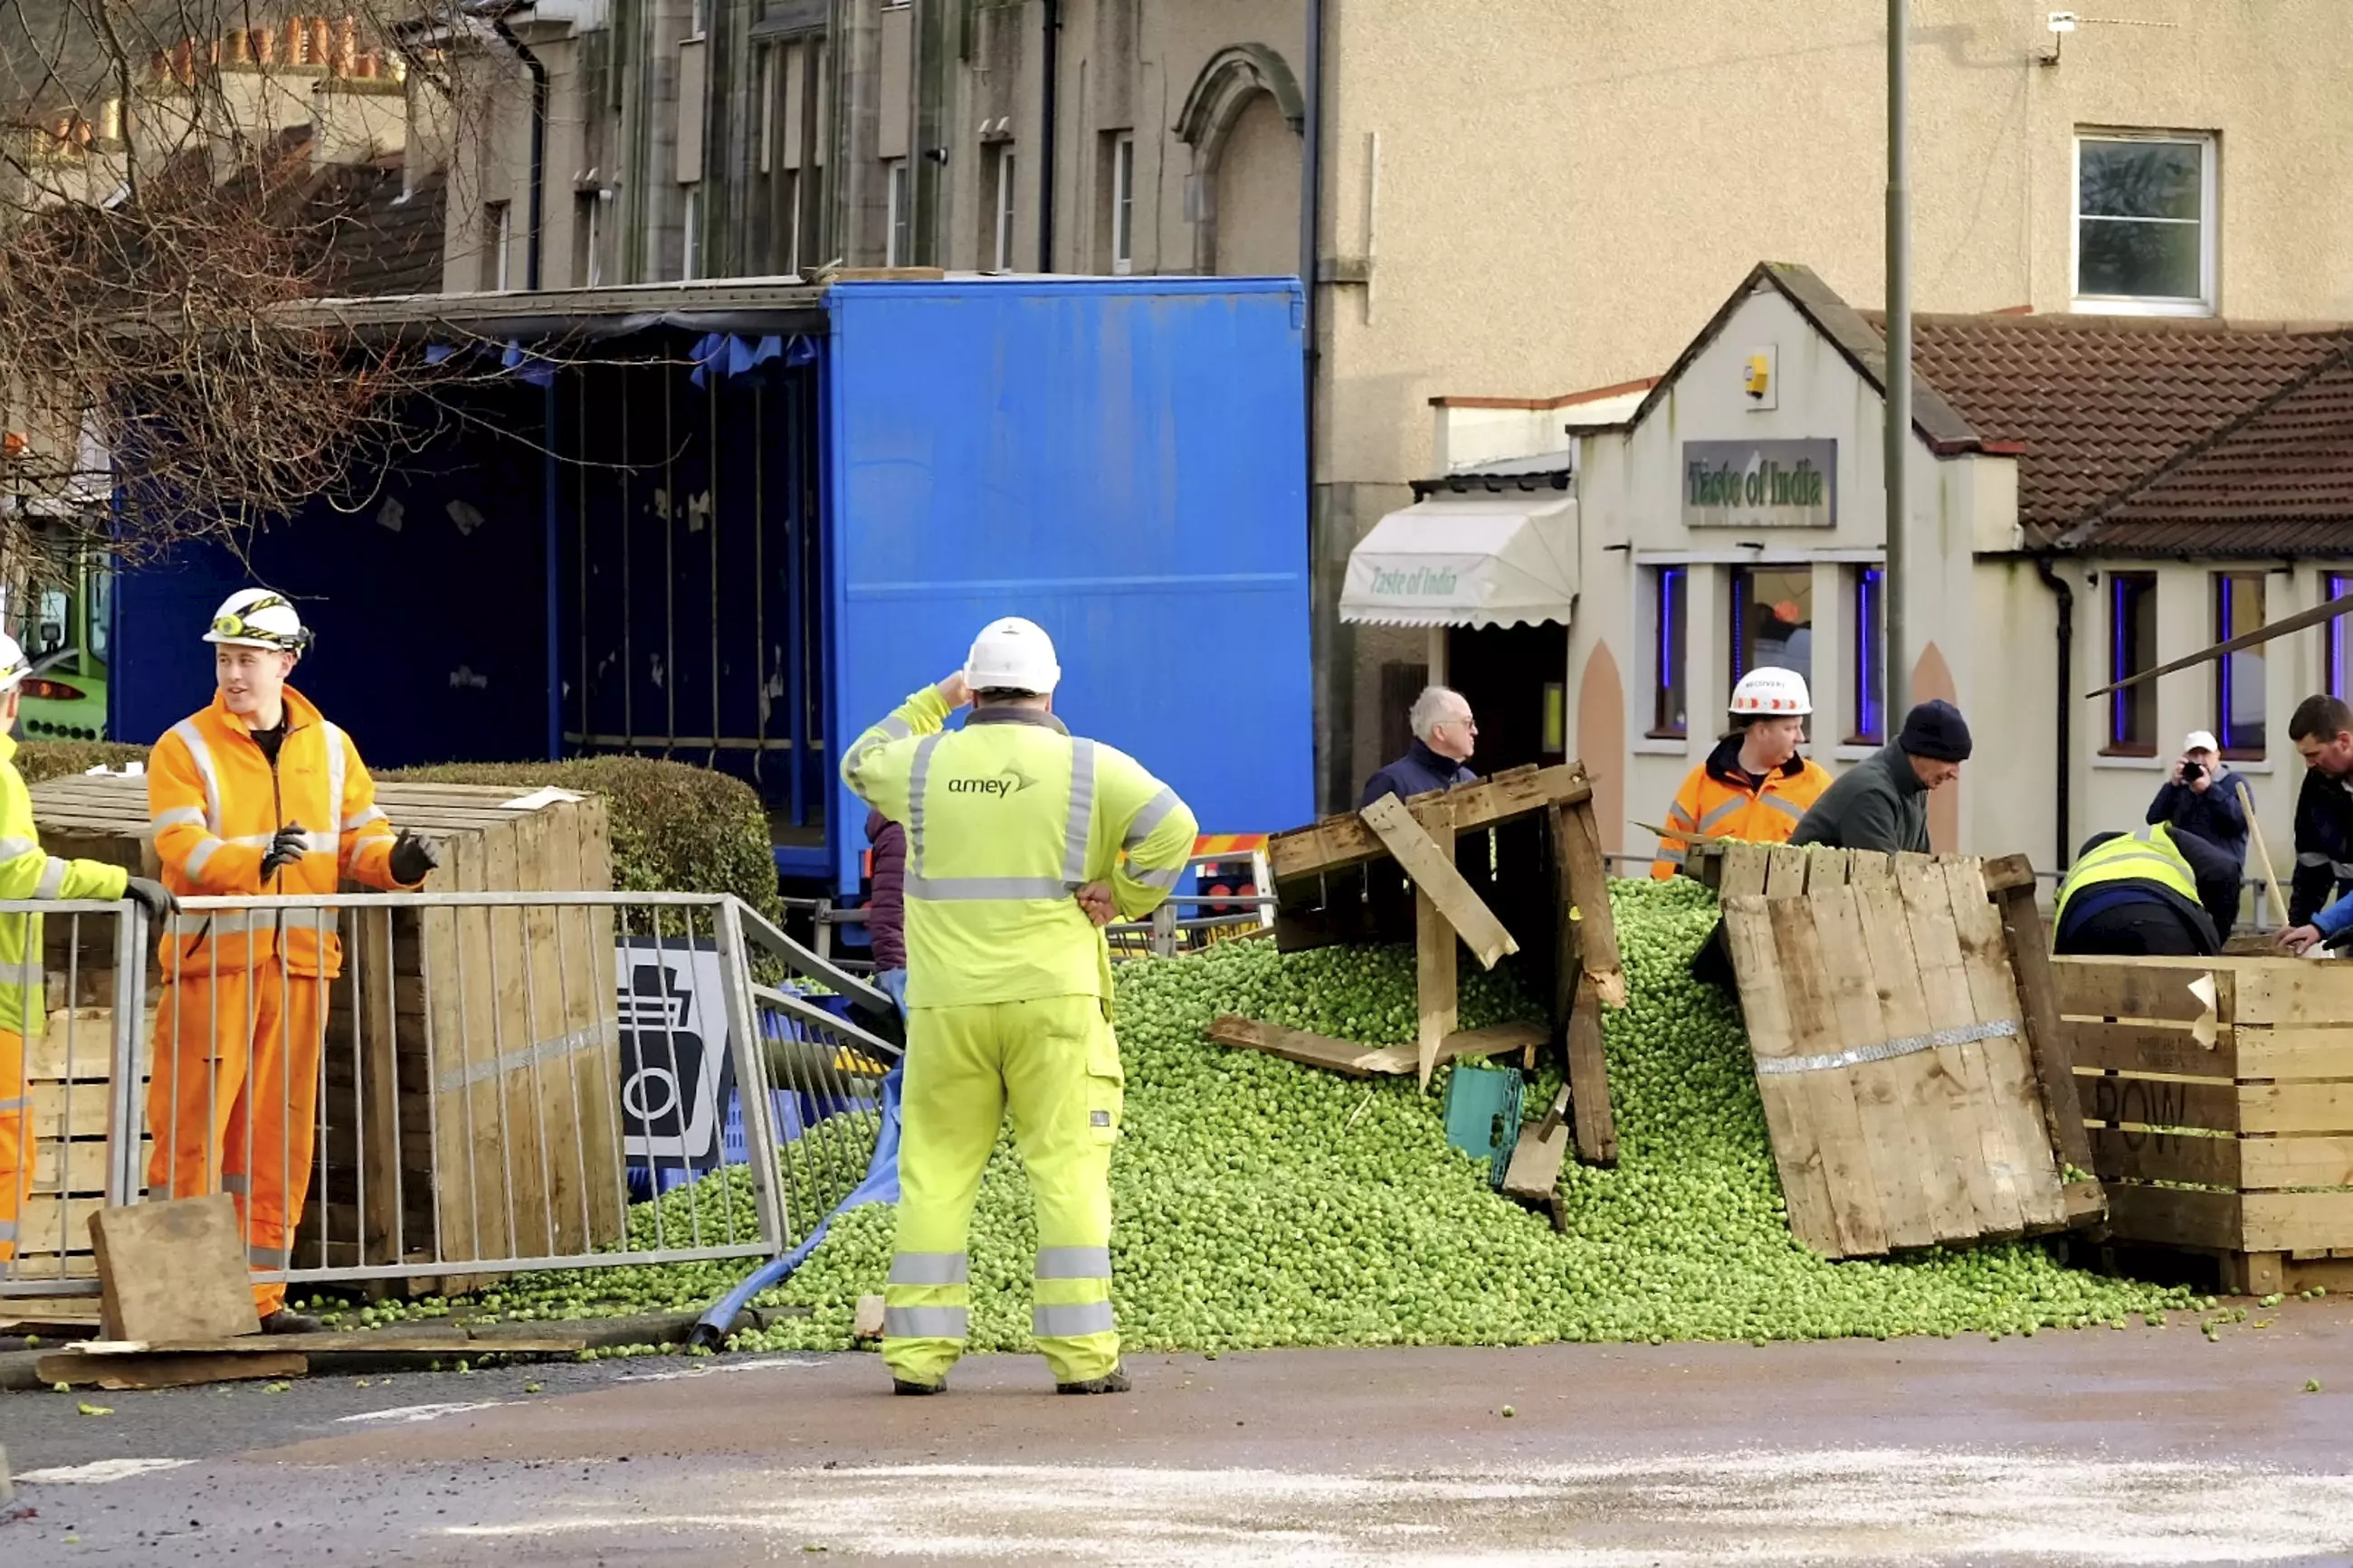 The road was closed as workers cleaned away the sprouts (